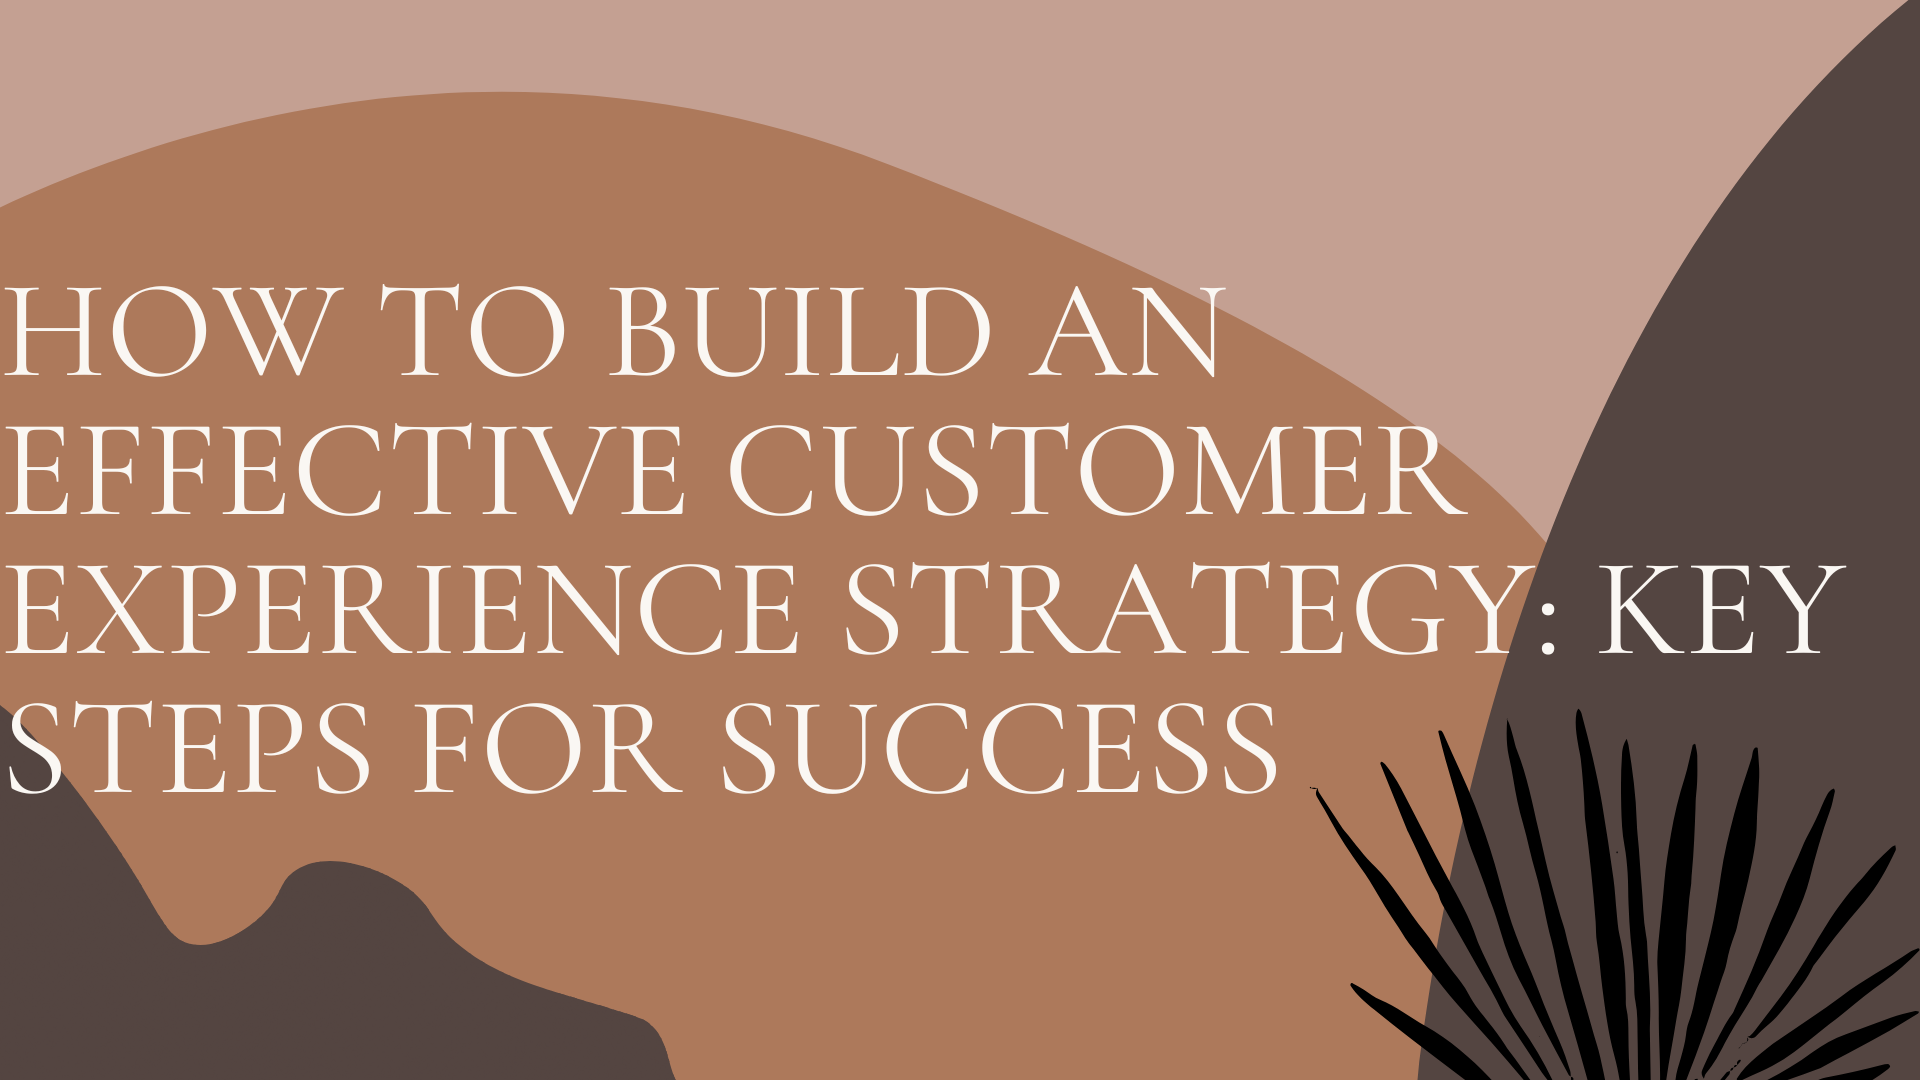 How to Build an Effective Customer Experience Strategy: Key Steps for Success